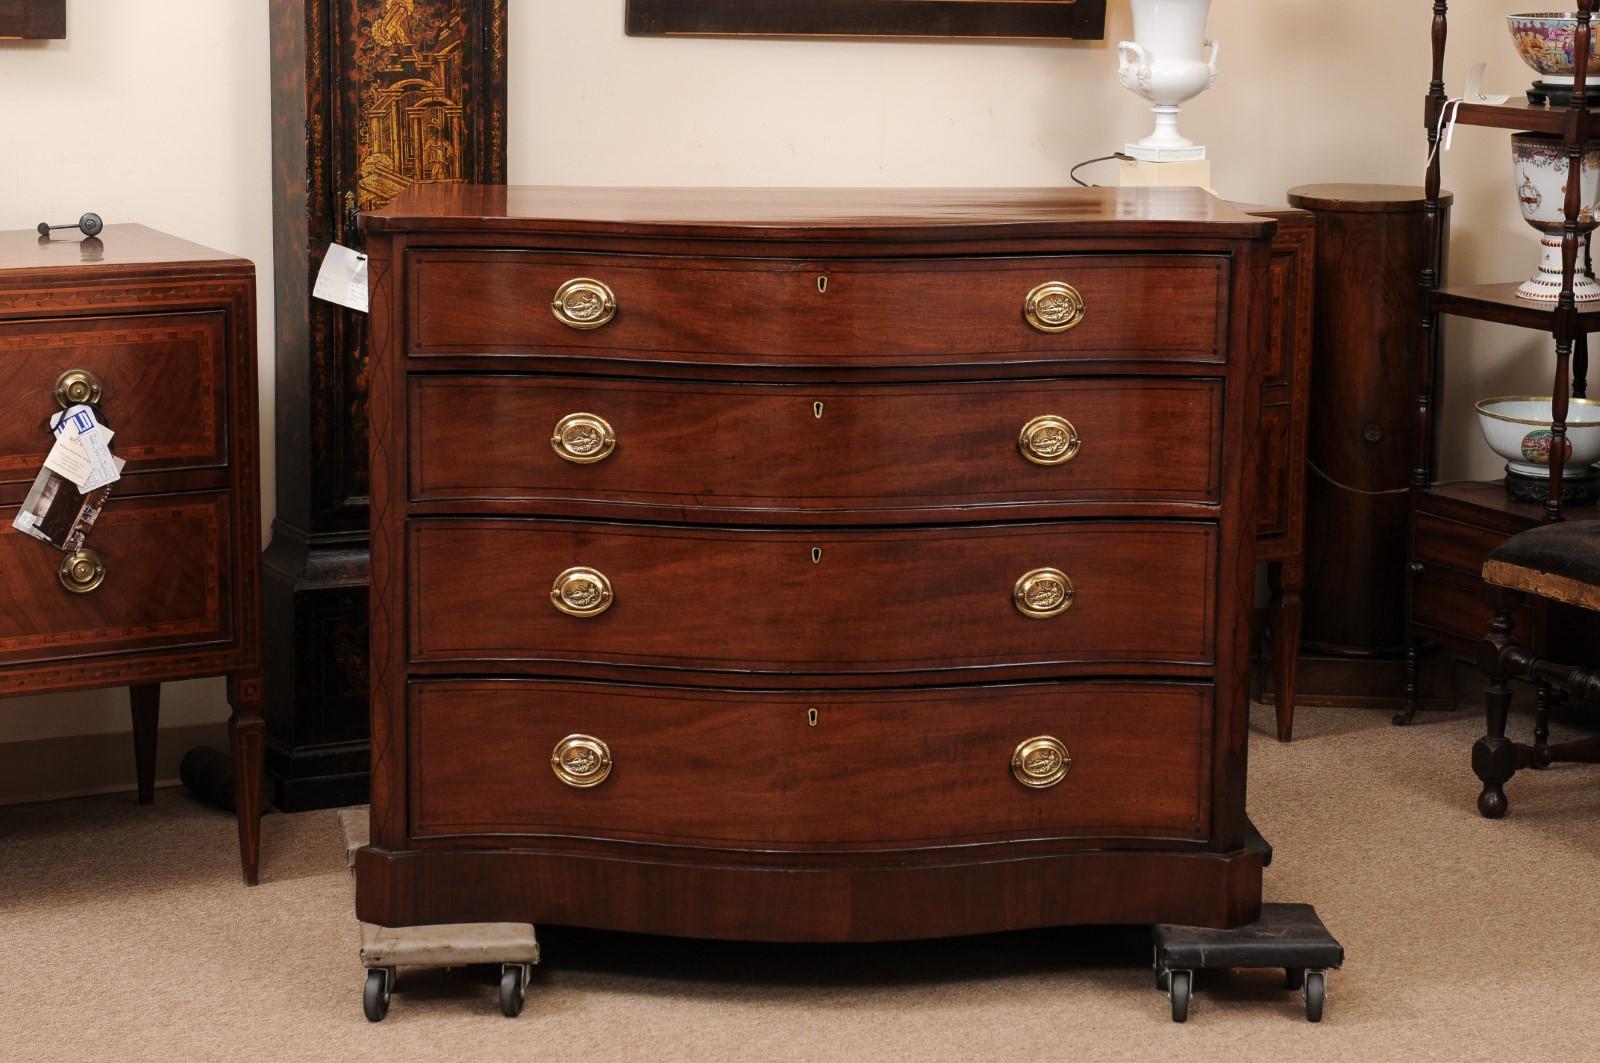 Large 19th Century English Mahogany Serpentine Chest with Ebonized String Inlay For Sale 10